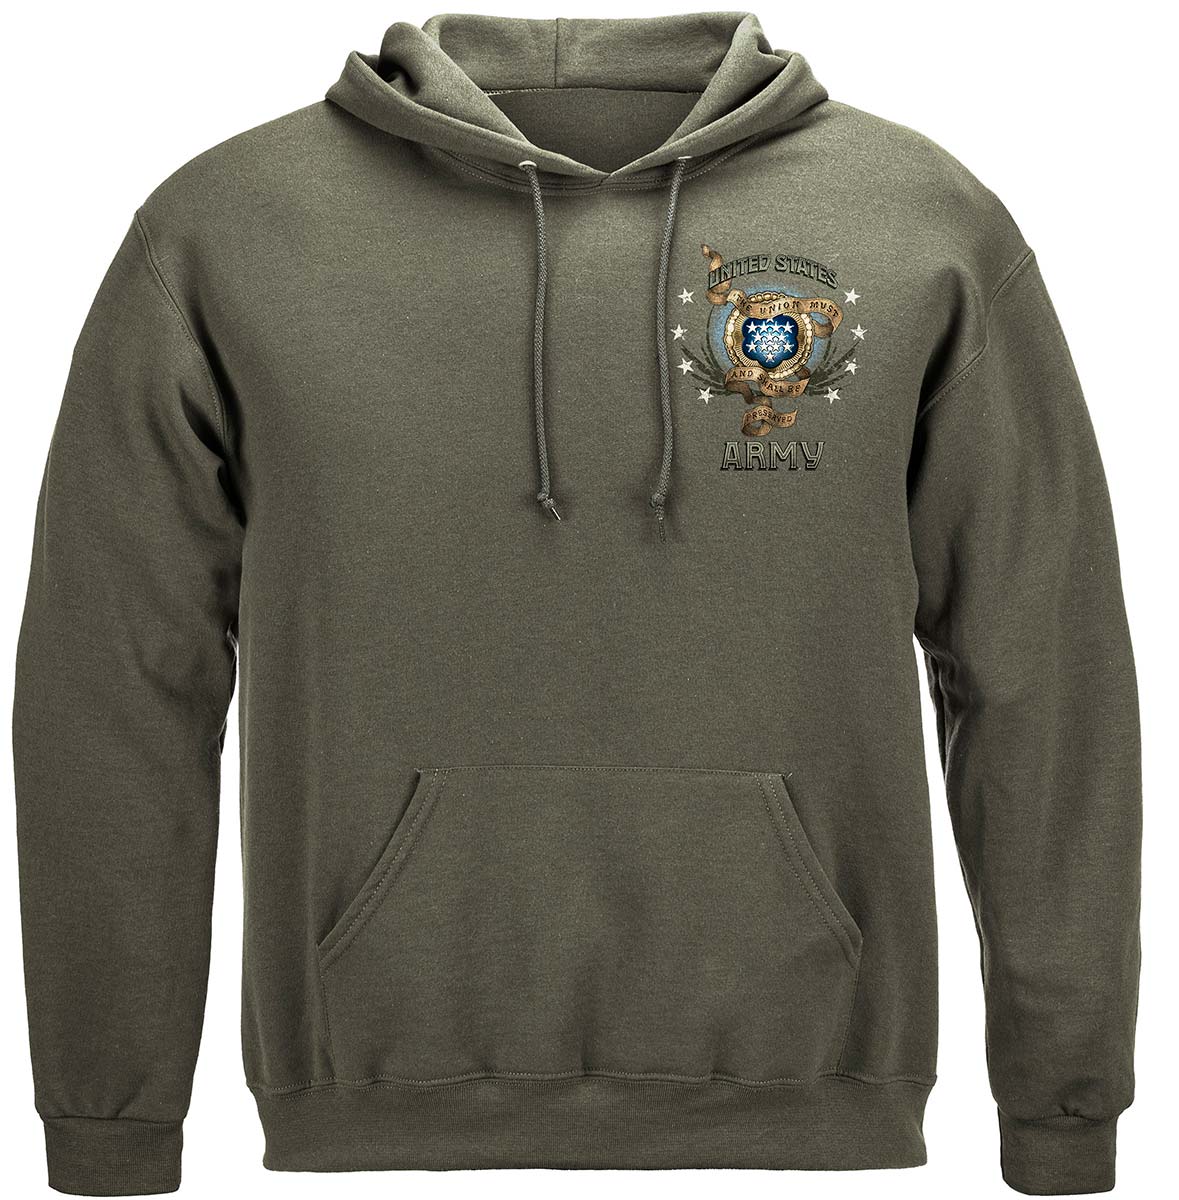 Army Respond To Your Country Call Premium Hooded Sweat Shirt